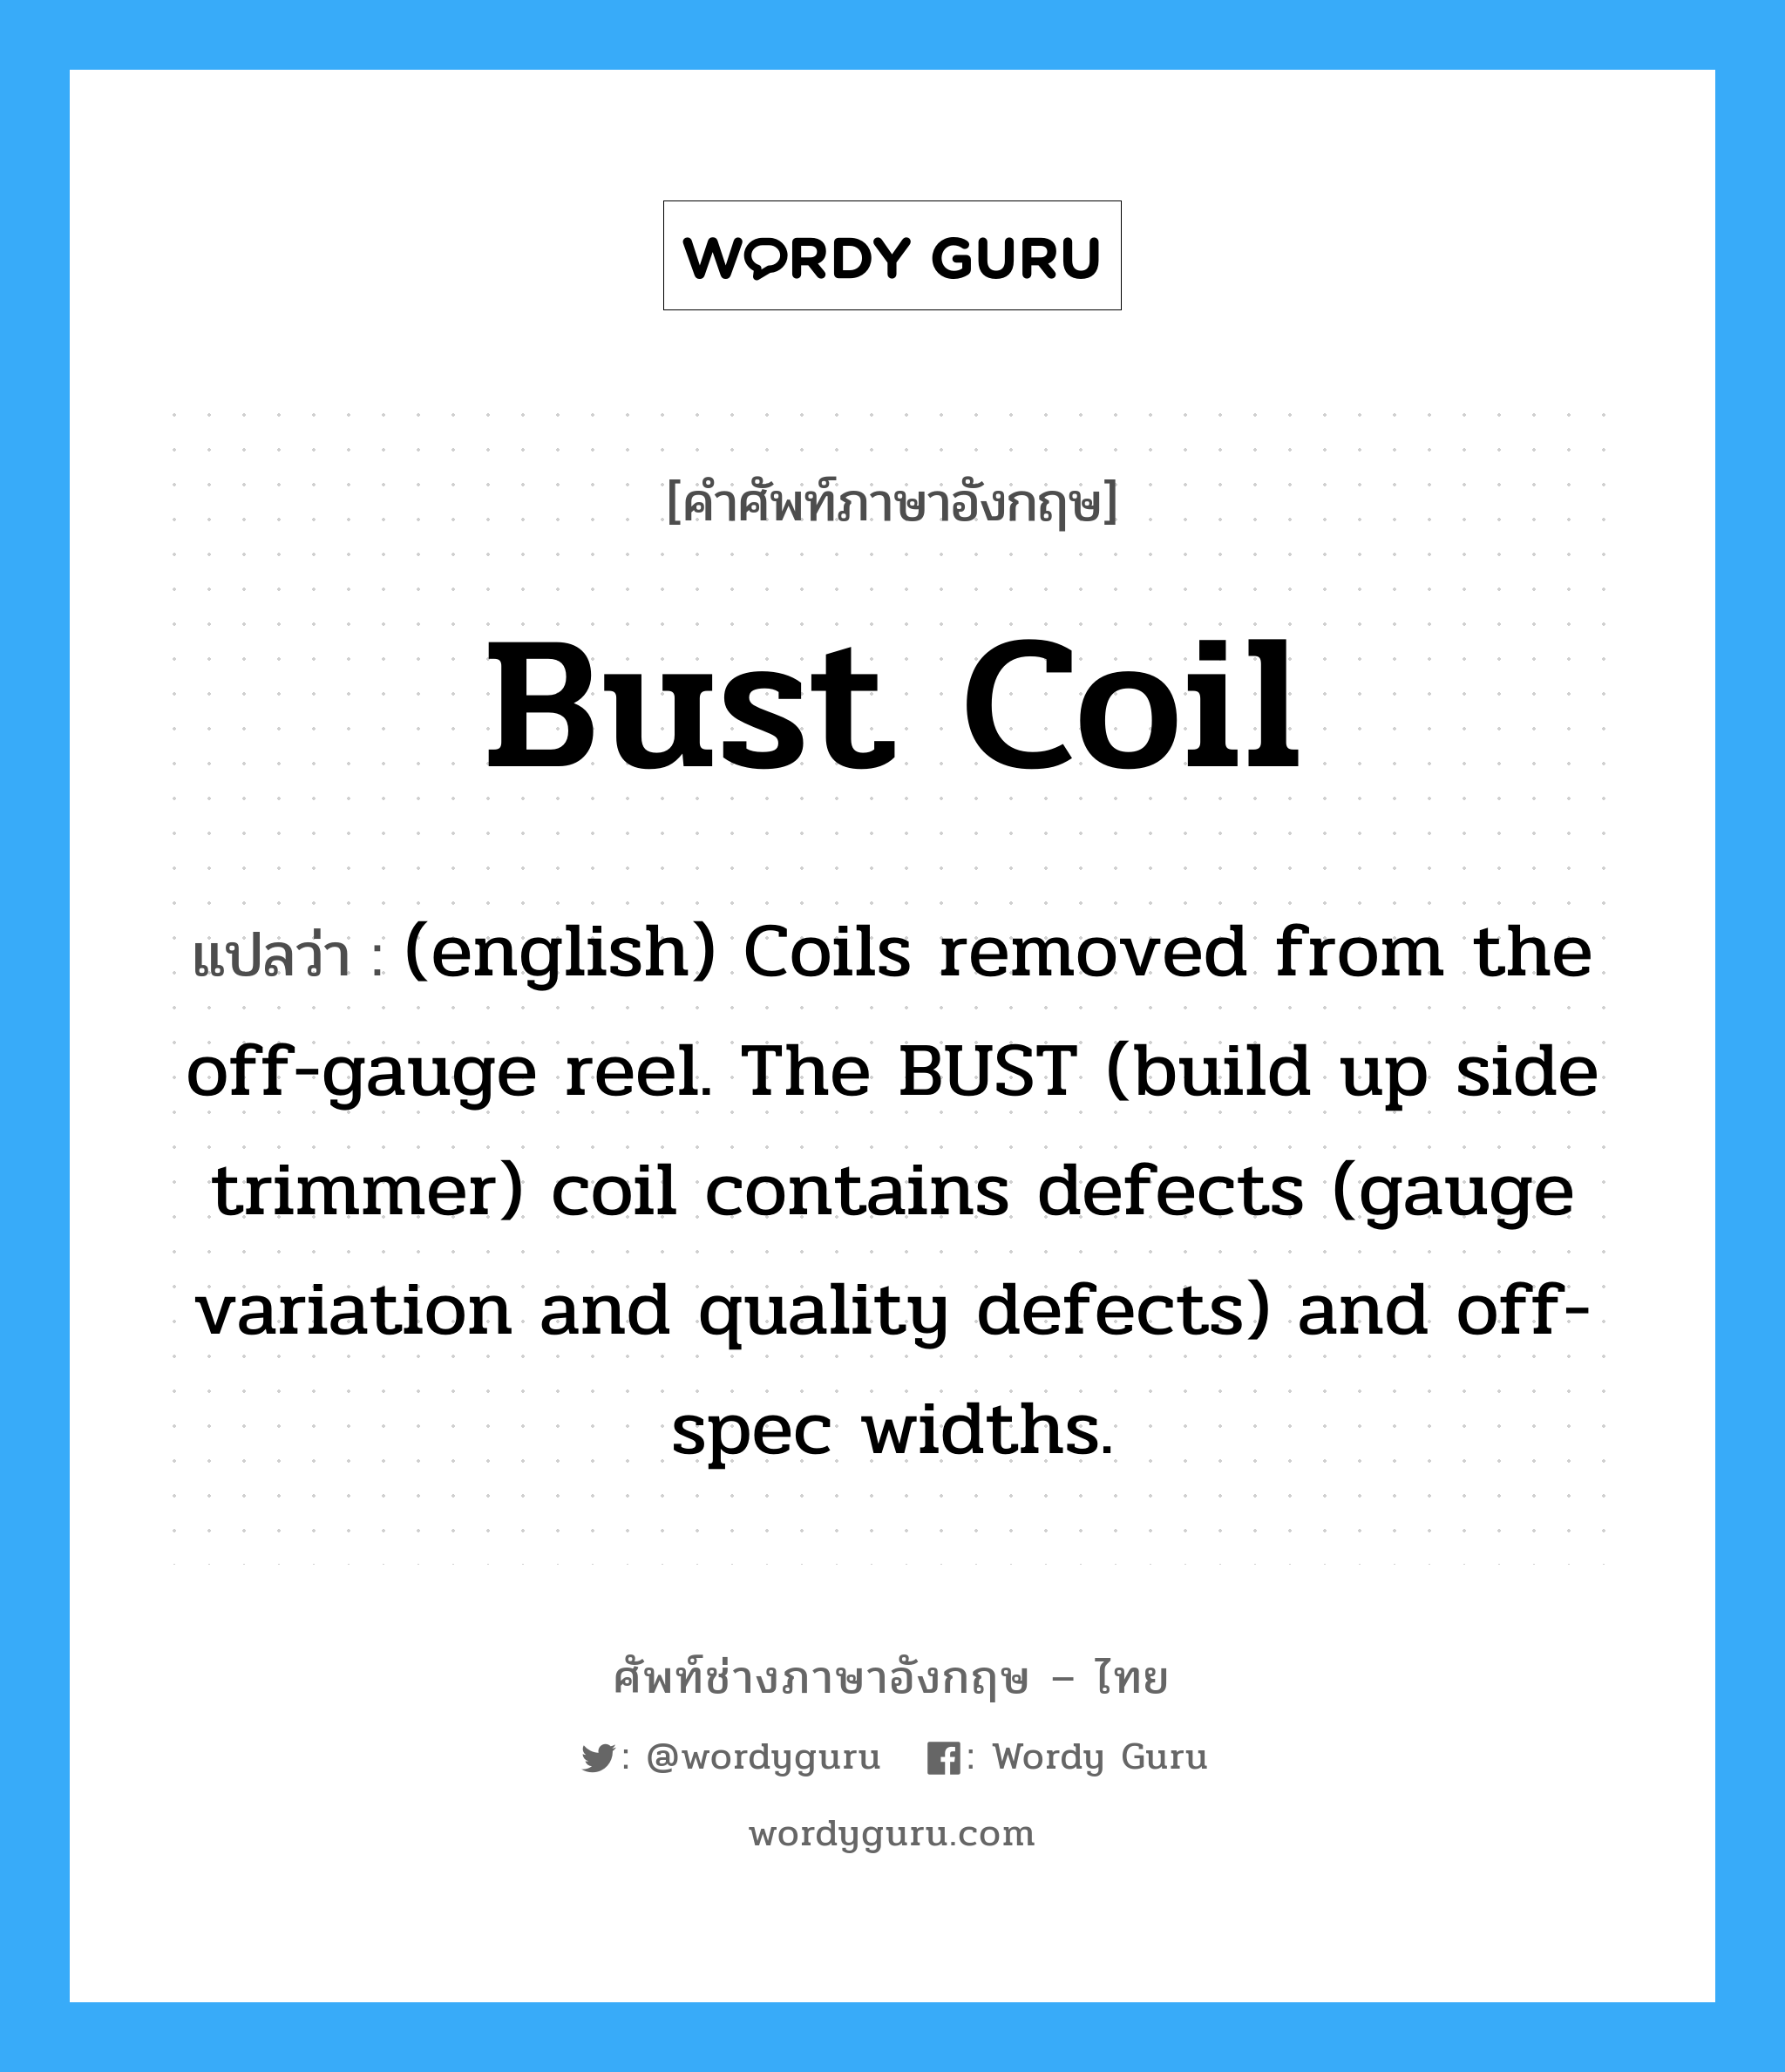 (english) Coils removed from the off-gauge reel. The BUST (build up side trimmer) coil contains defects (gauge variation and quality defects) and off-spec widths. ภาษาอังกฤษ?, คำศัพท์ช่างภาษาอังกฤษ - ไทย (english) Coils removed from the off-gauge reel. The BUST (build up side trimmer) coil contains defects (gauge variation and quality defects) and off-spec widths. คำศัพท์ภาษาอังกฤษ (english) Coils removed from the off-gauge reel. The BUST (build up side trimmer) coil contains defects (gauge variation and quality defects) and off-spec widths. แปลว่า Bust Coil